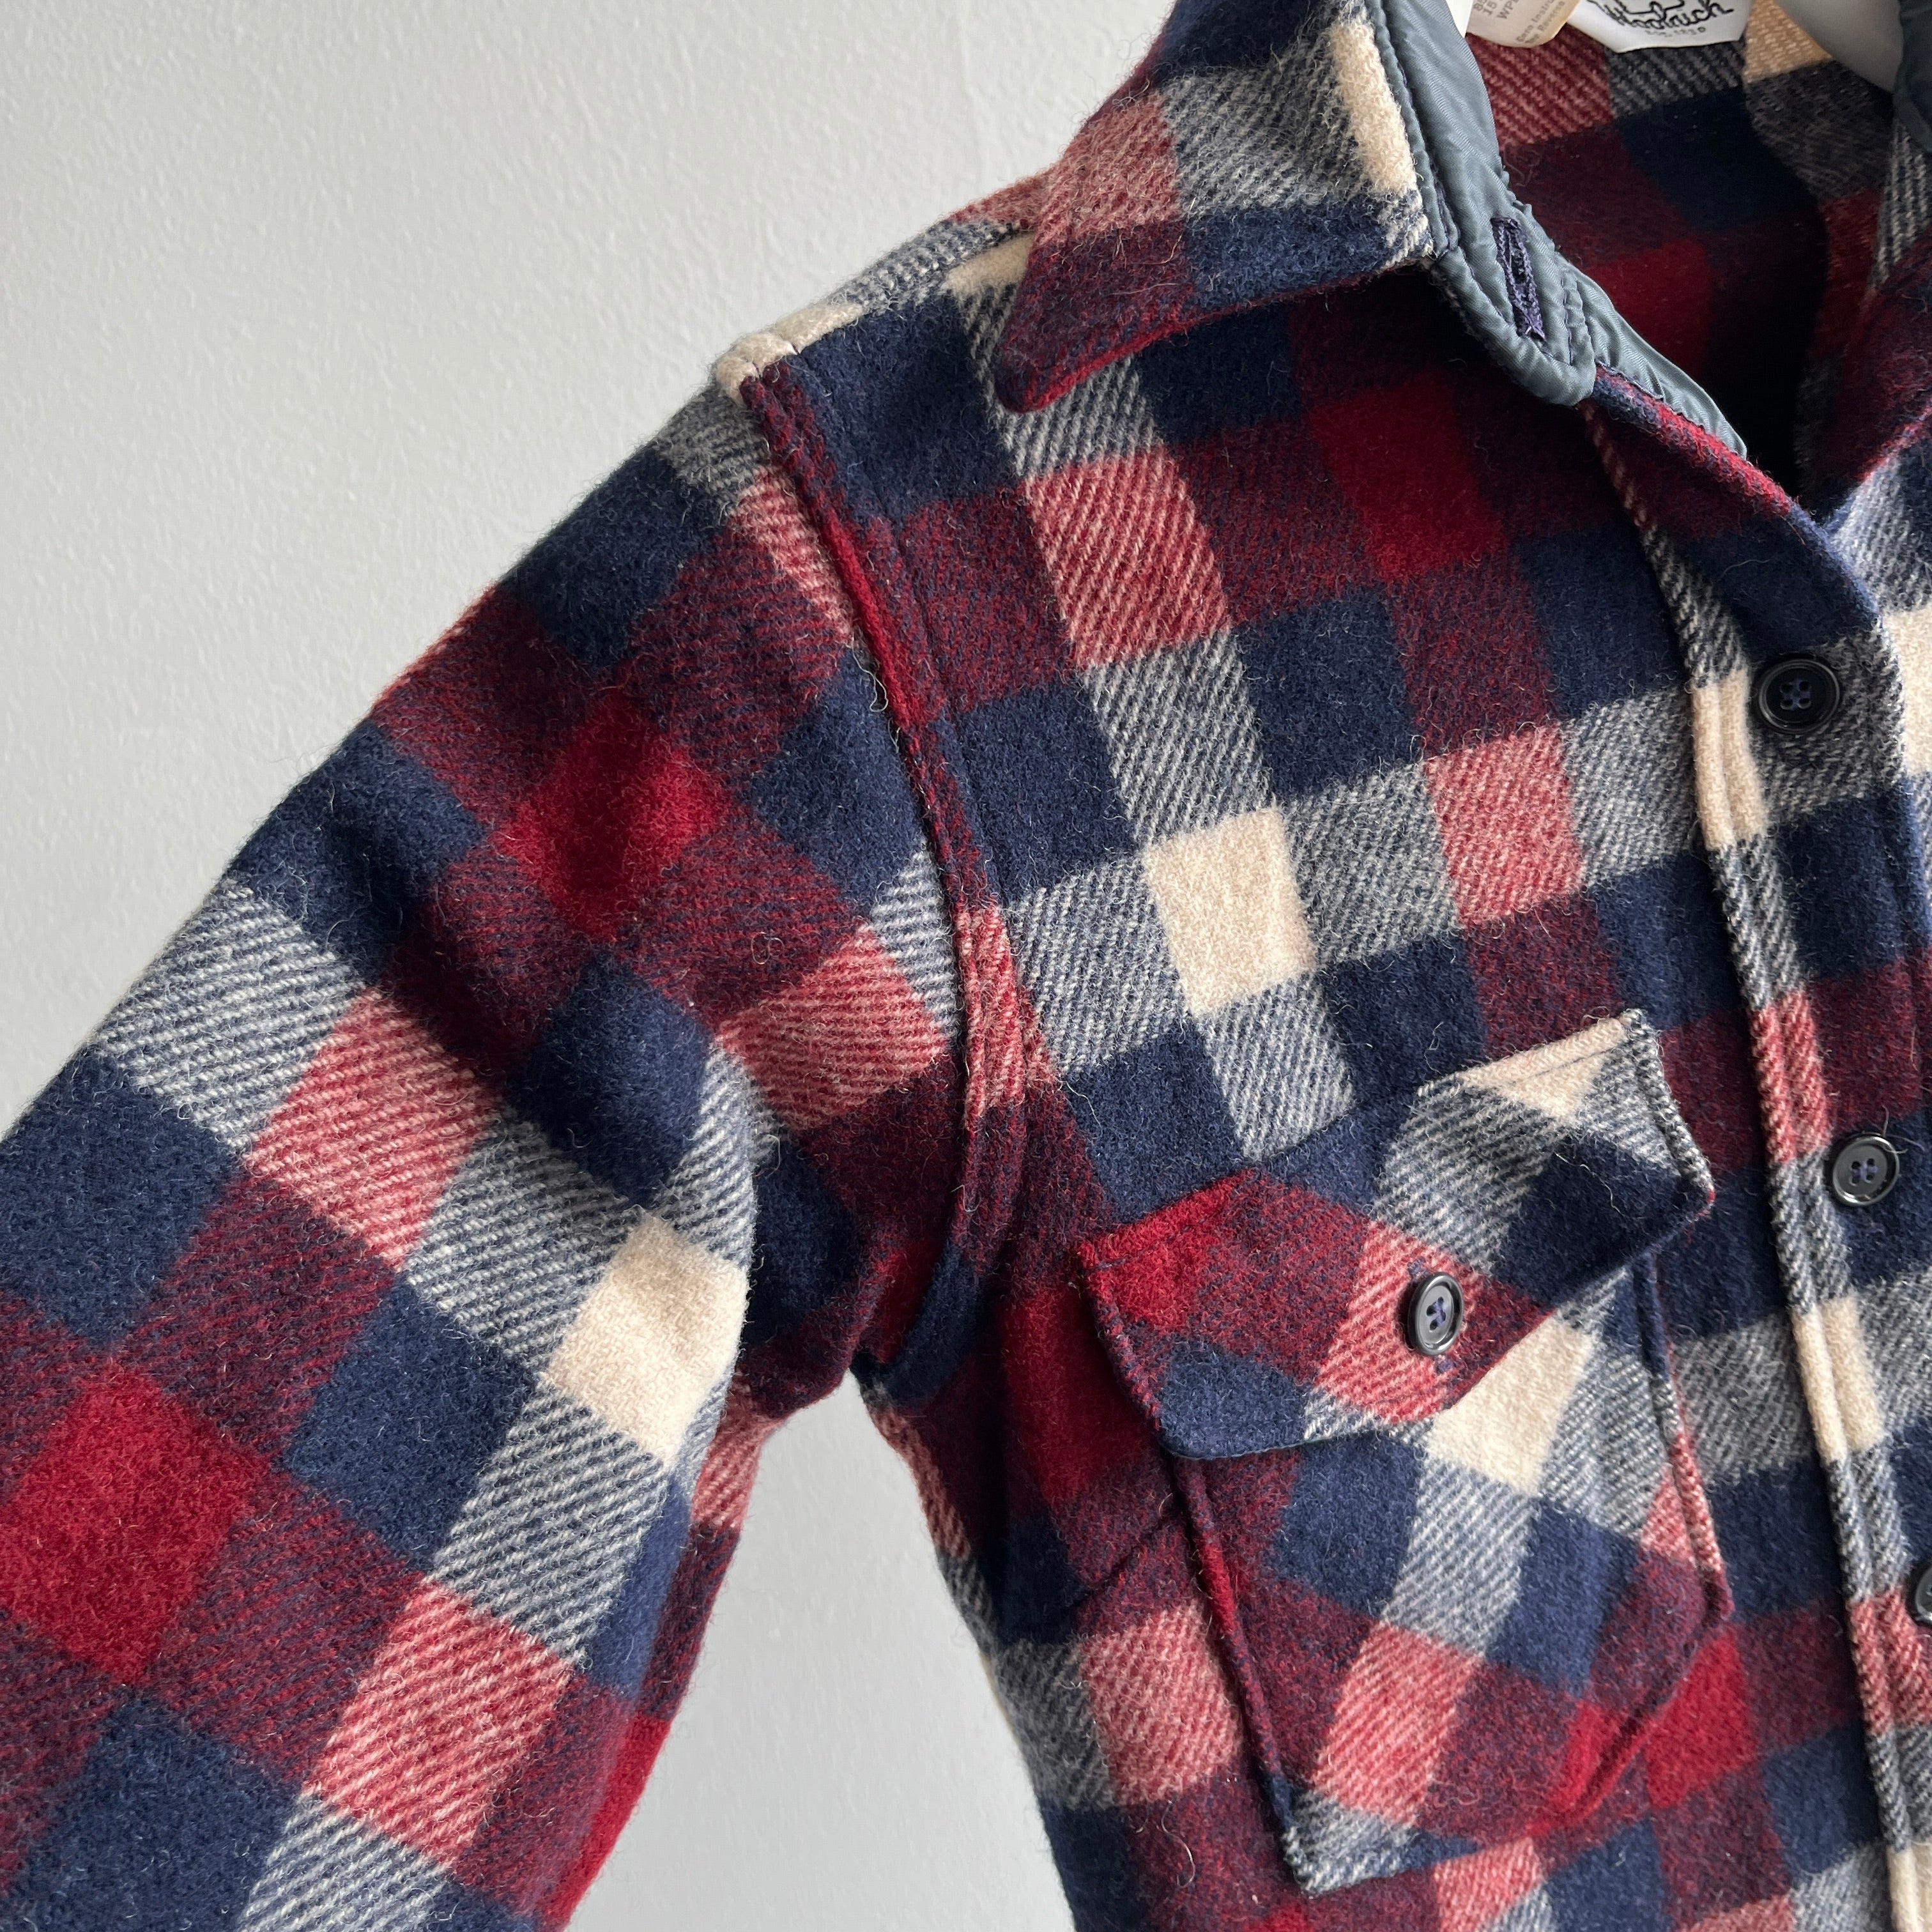 1970/80s Smaller Wool Woolrich Flannel in Excellent Condition